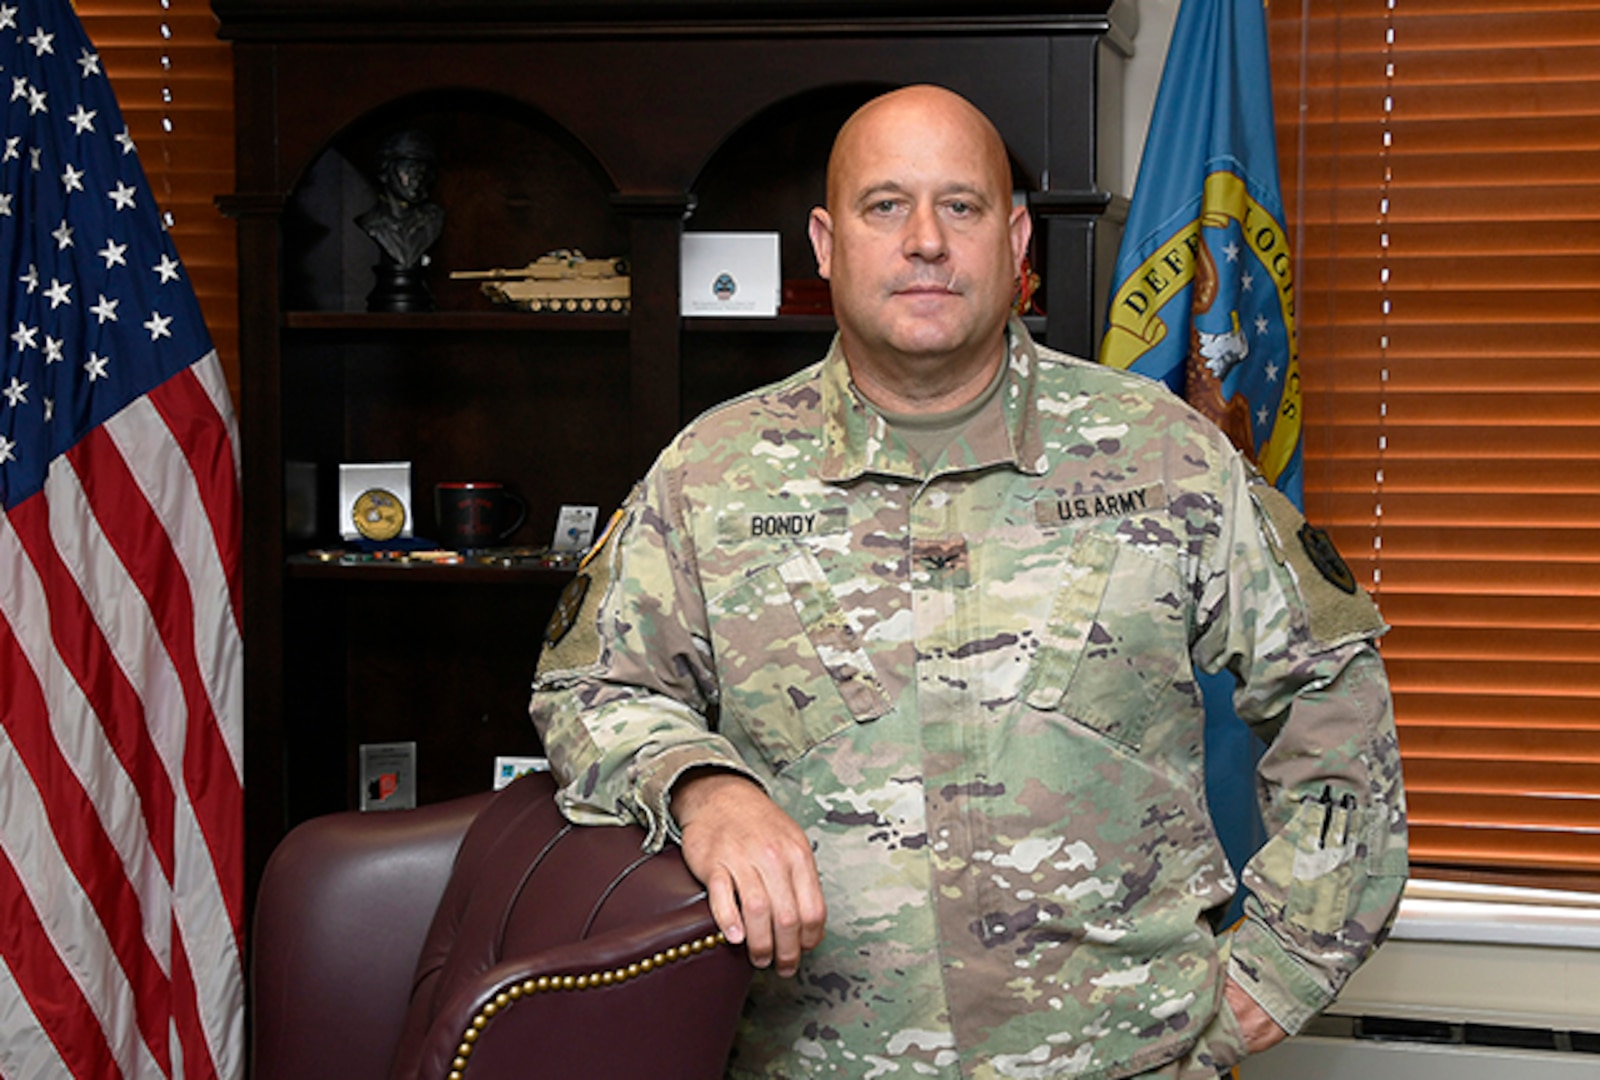 Army Col. Wayne Bondy stands in his DLA Disposition Services office.